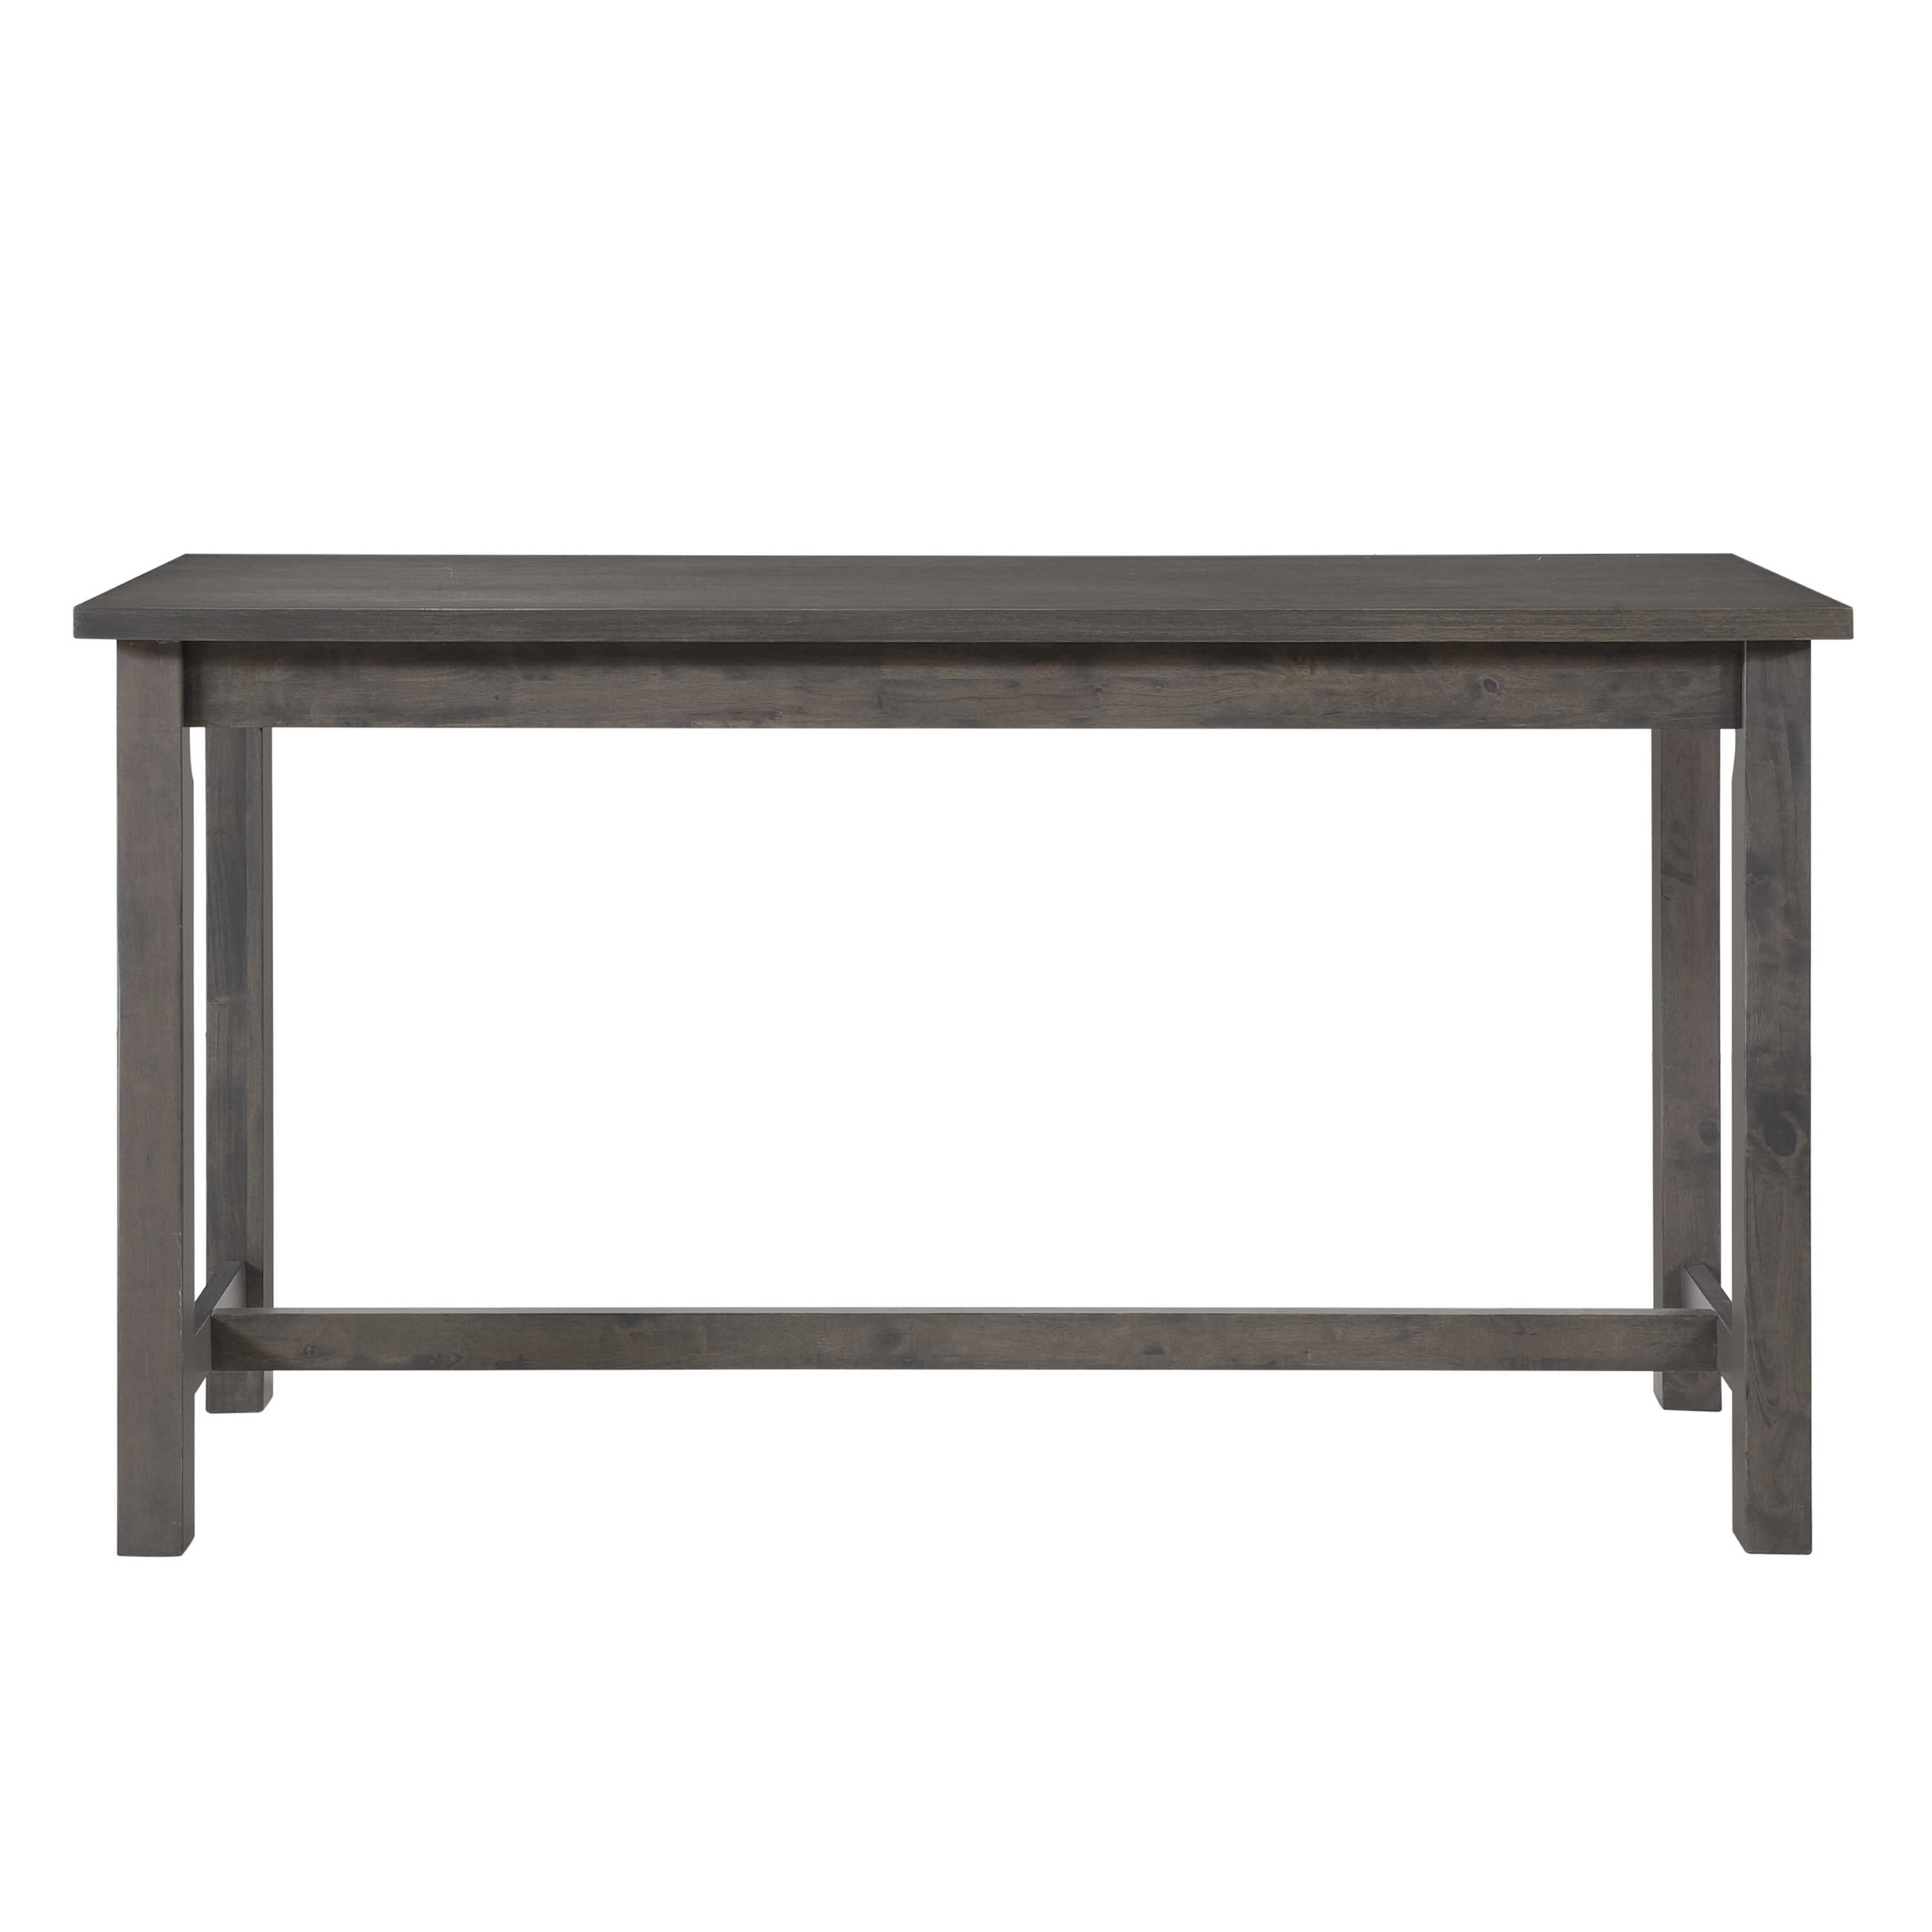 Connected Dining Set Grey 5713GY